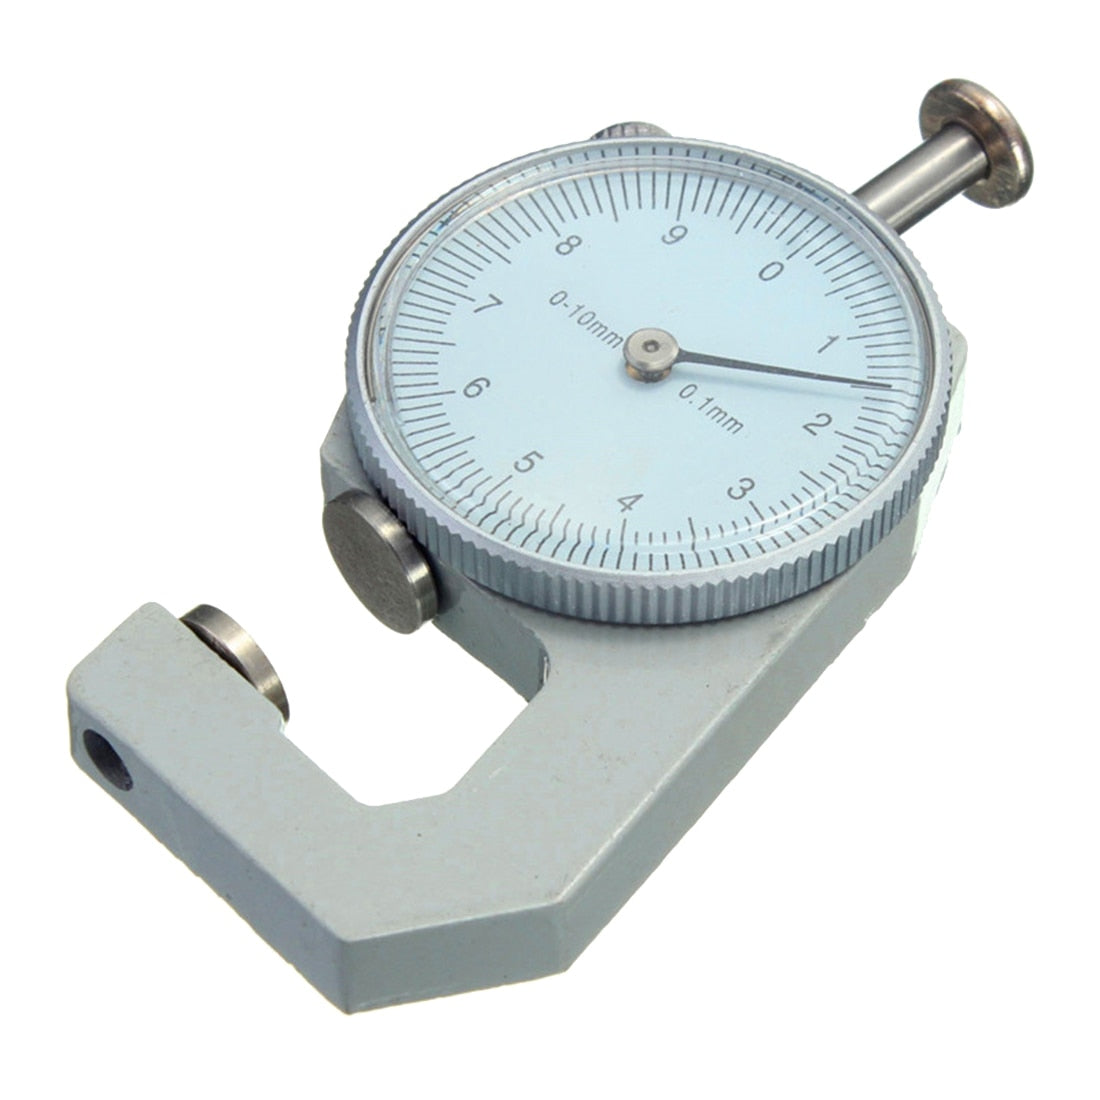 New 0-10mm Thickness Gauge Tester Leather Craft Leathercraft Tools Accuracy 0.1mm - ebowsos